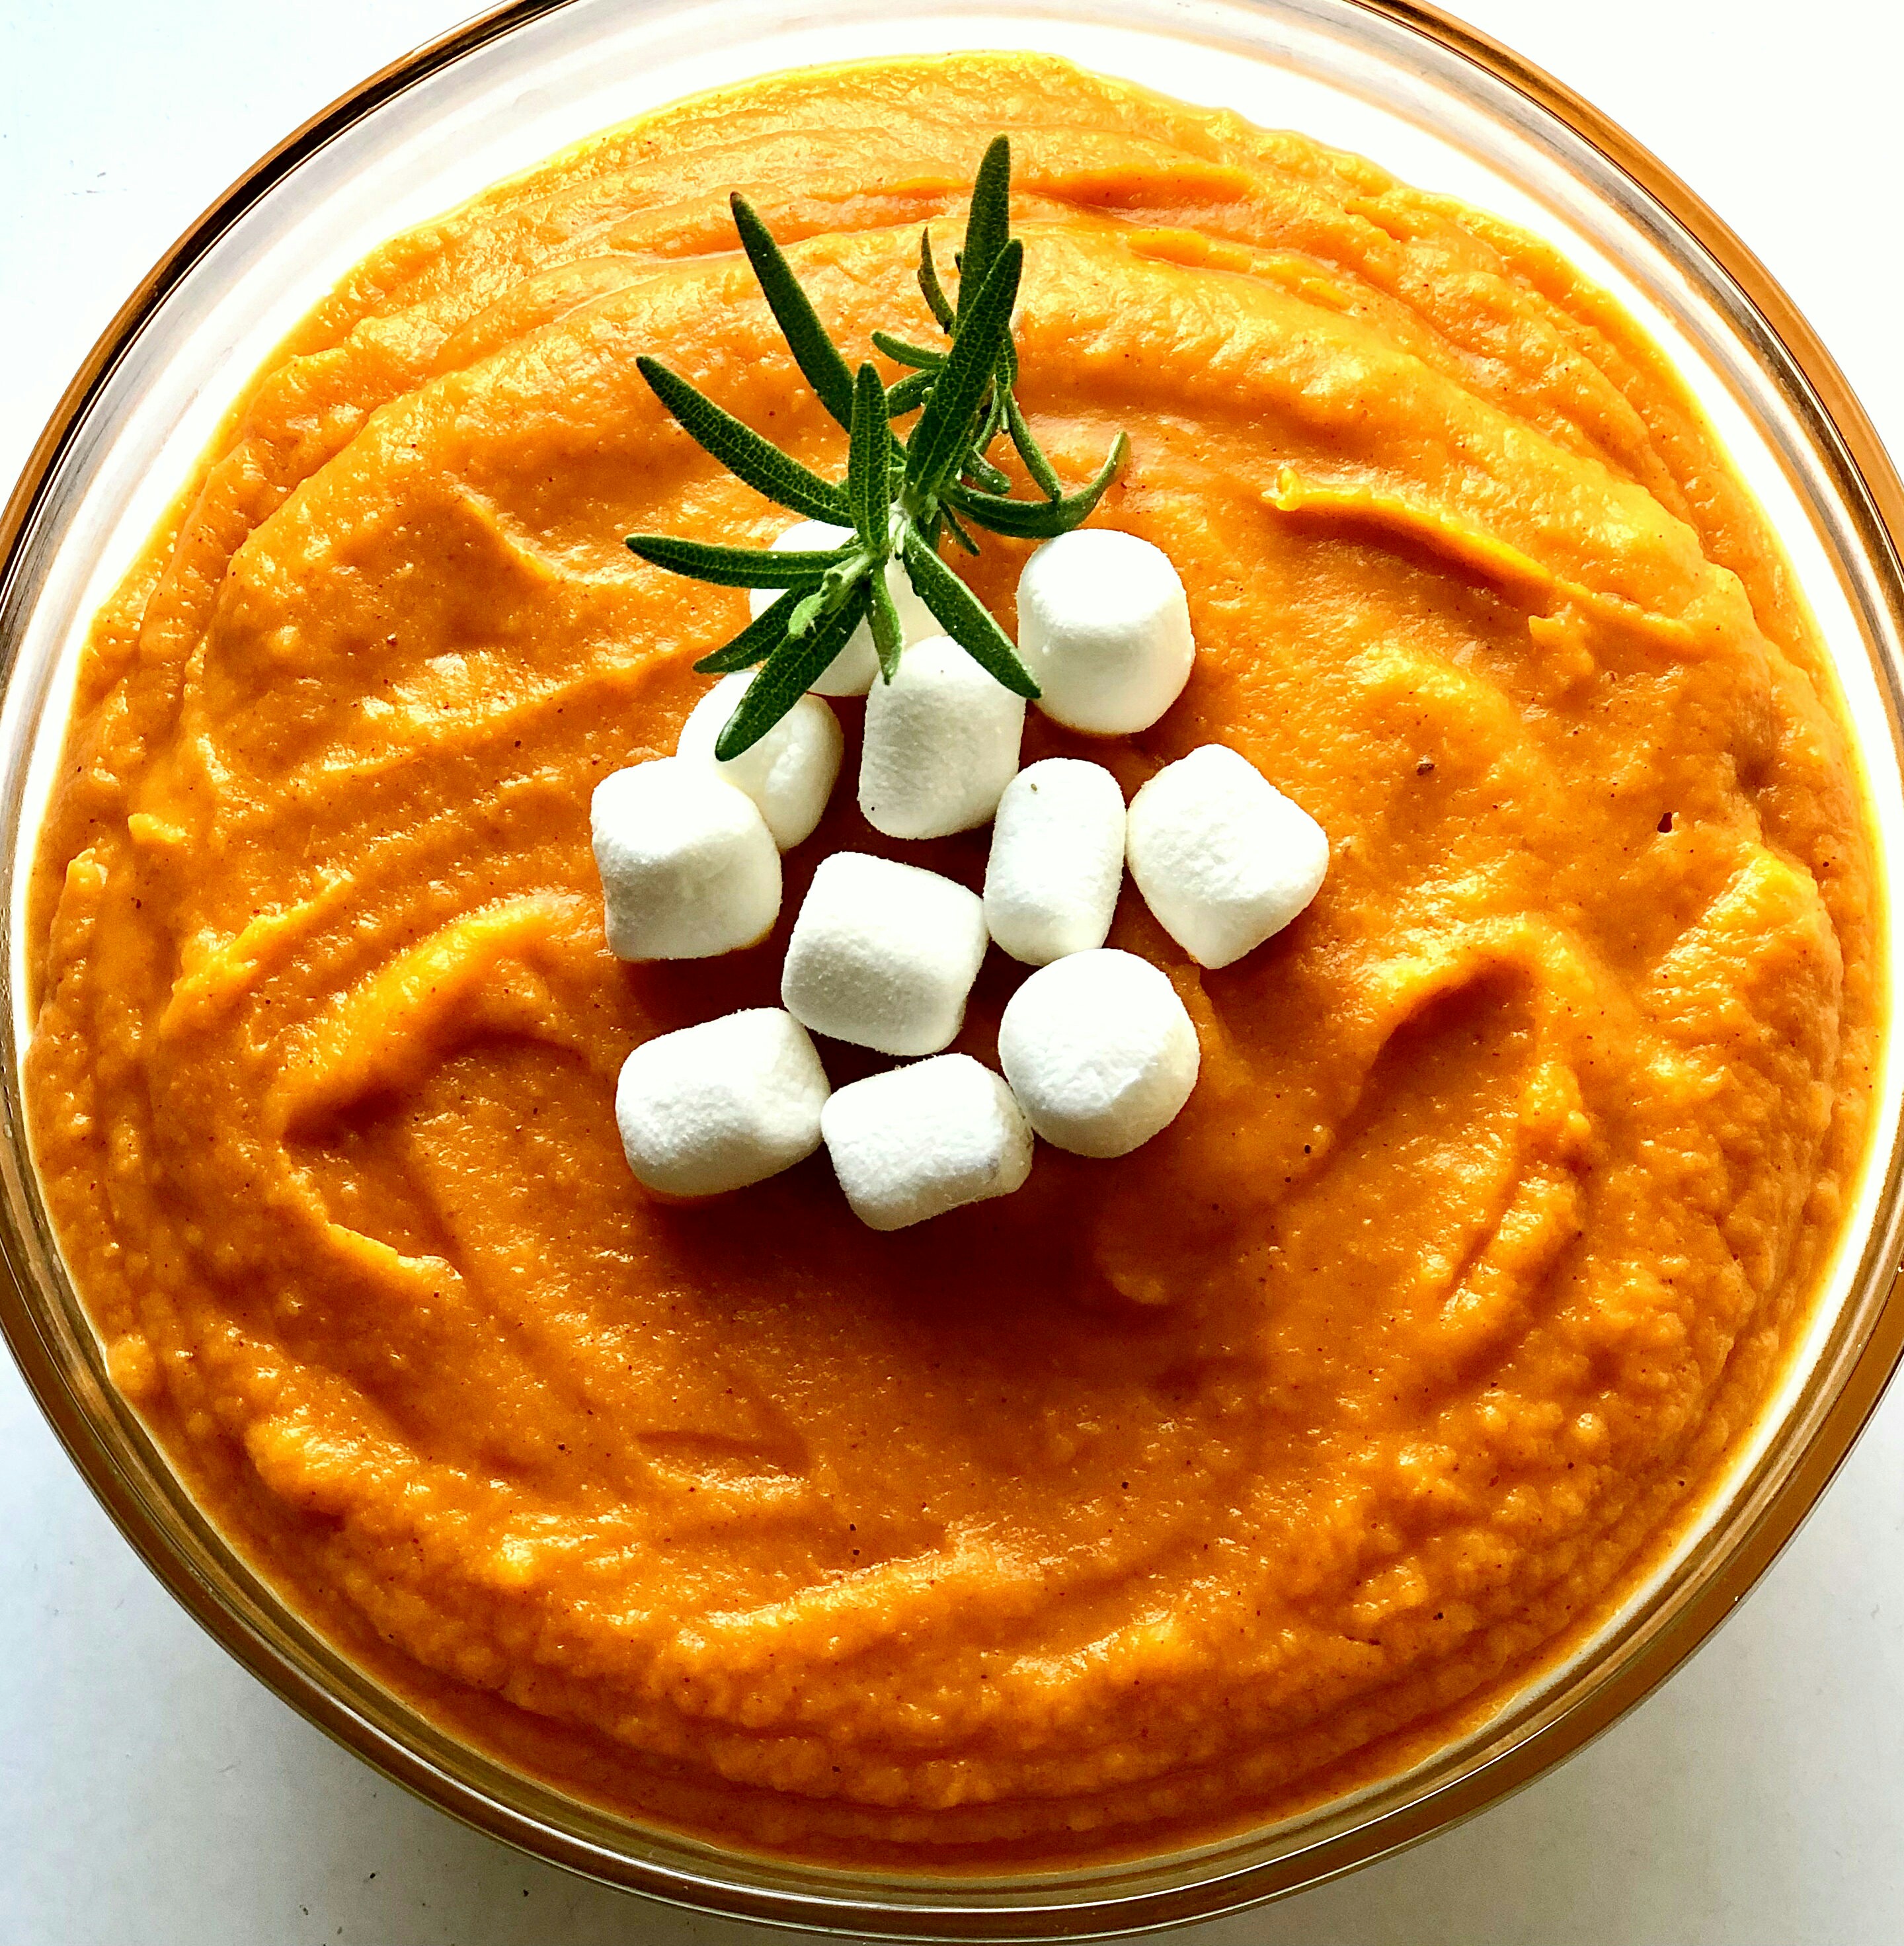 Mashed Sweet Potatoes in the Slow Cooker